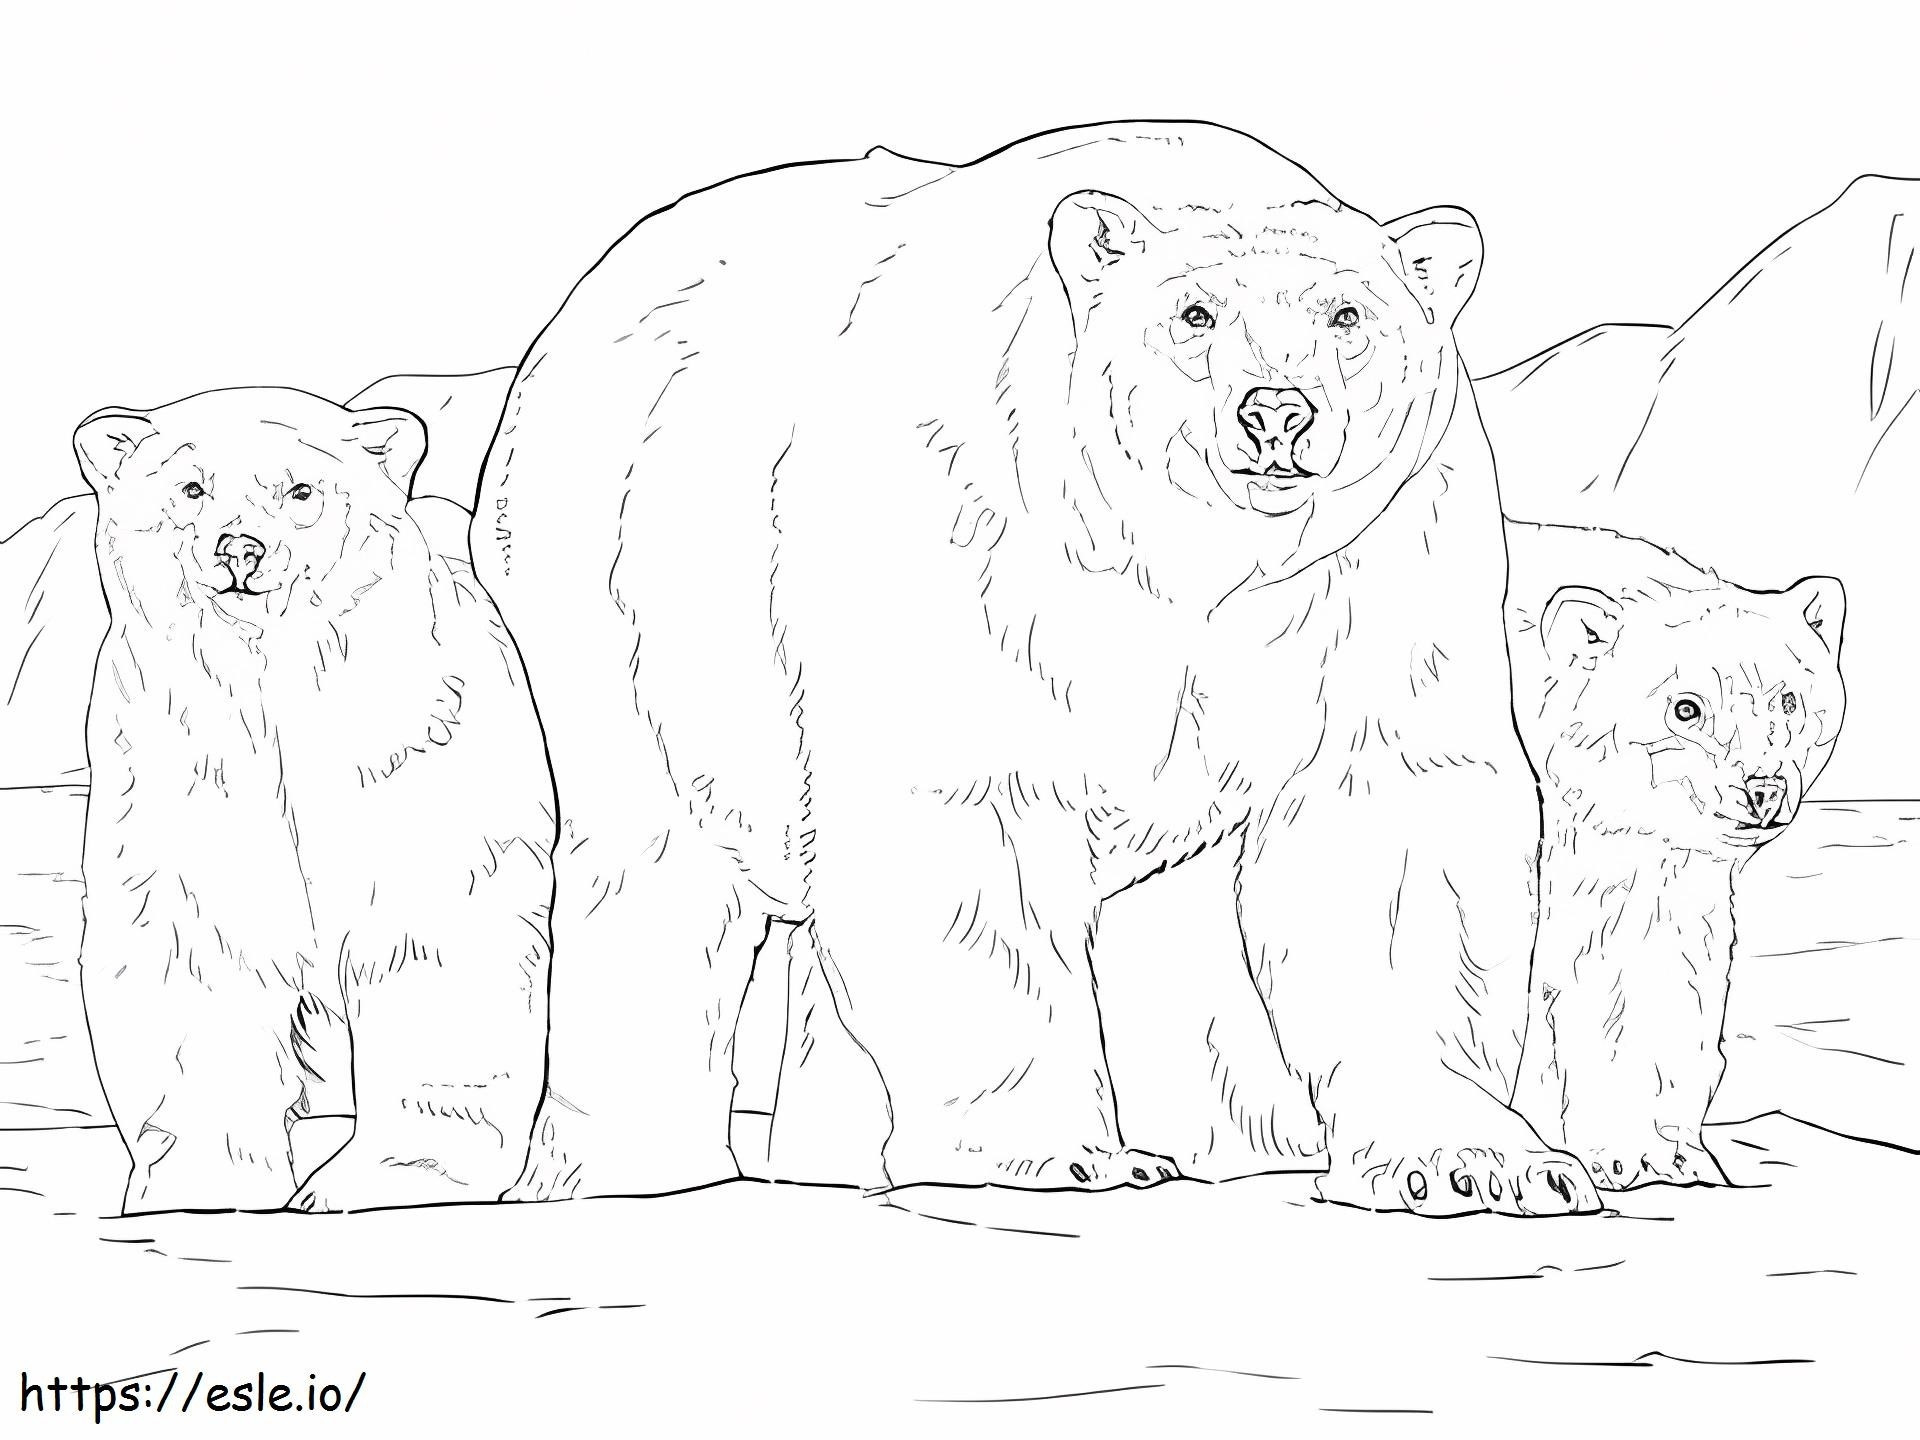 Ice Bear Holding Ax coloring page